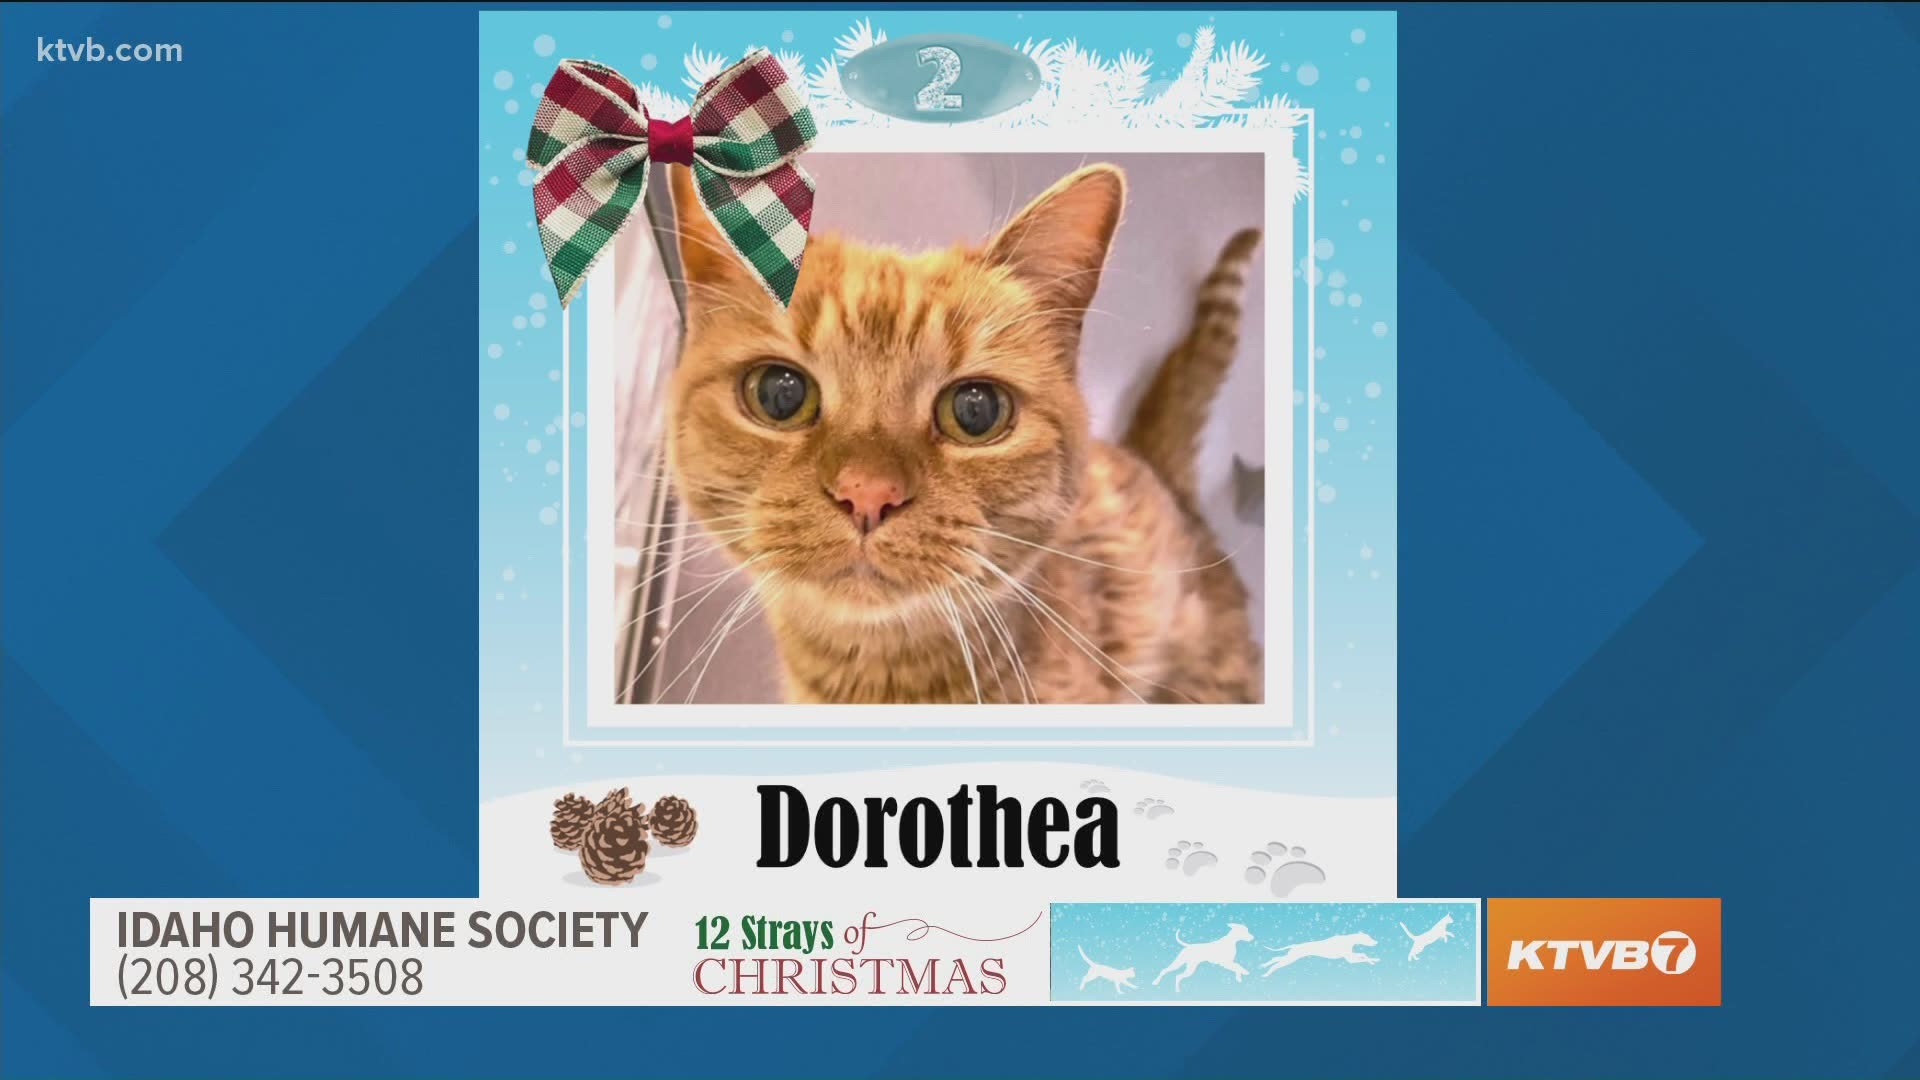 She is a senior pet that needs a home for the holidays.